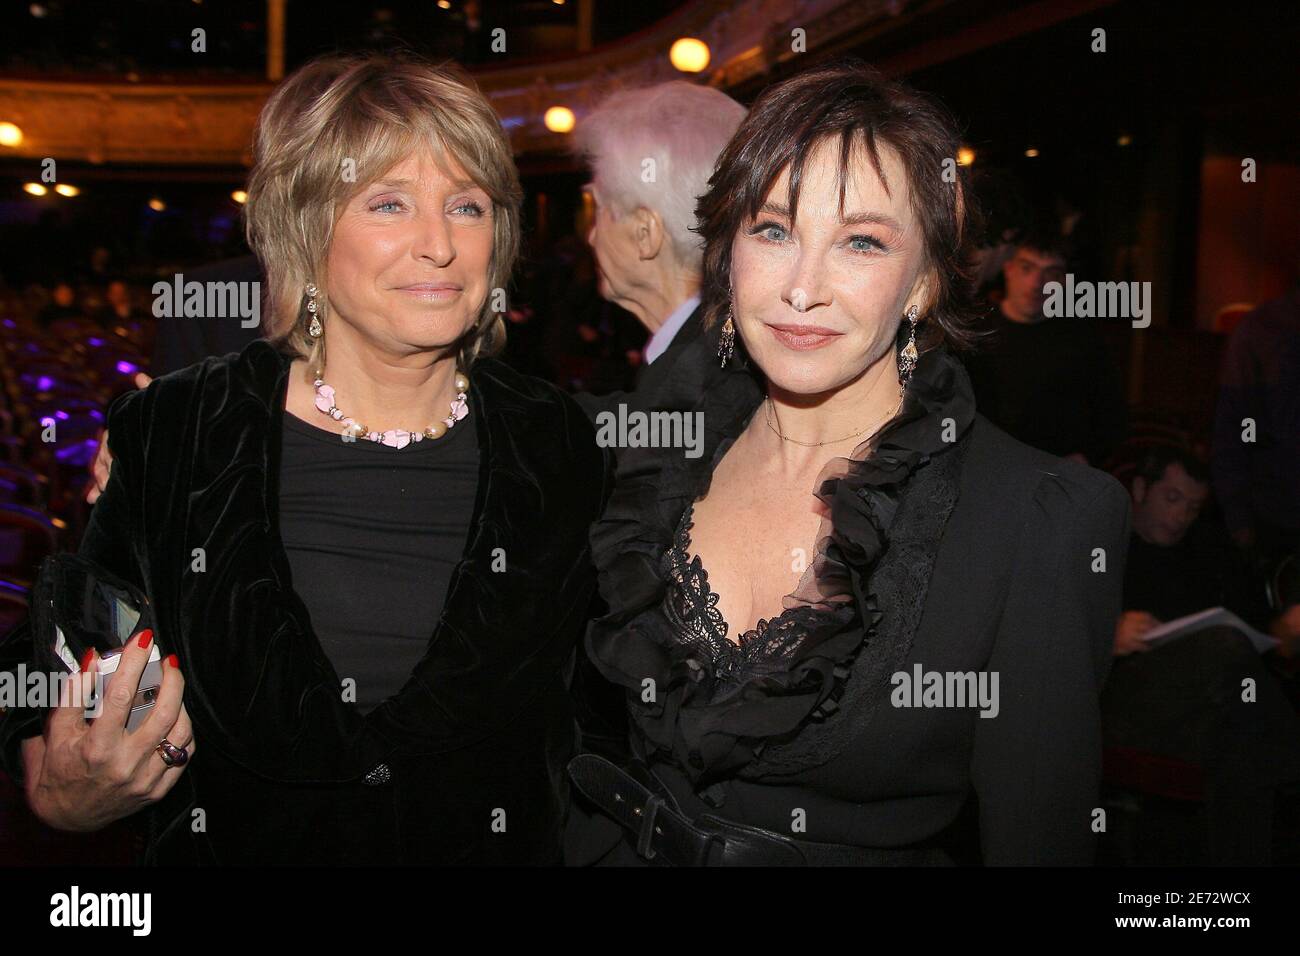 Daniele Thompson and Marlene Jobert during the 32nd Cesar awards ceremony held at the Theatre du Chatelet in Paris, France, on February 24, 2007. Photo by Guignebourg-Nebinger/ABACAPRESS.COM Stock Photo